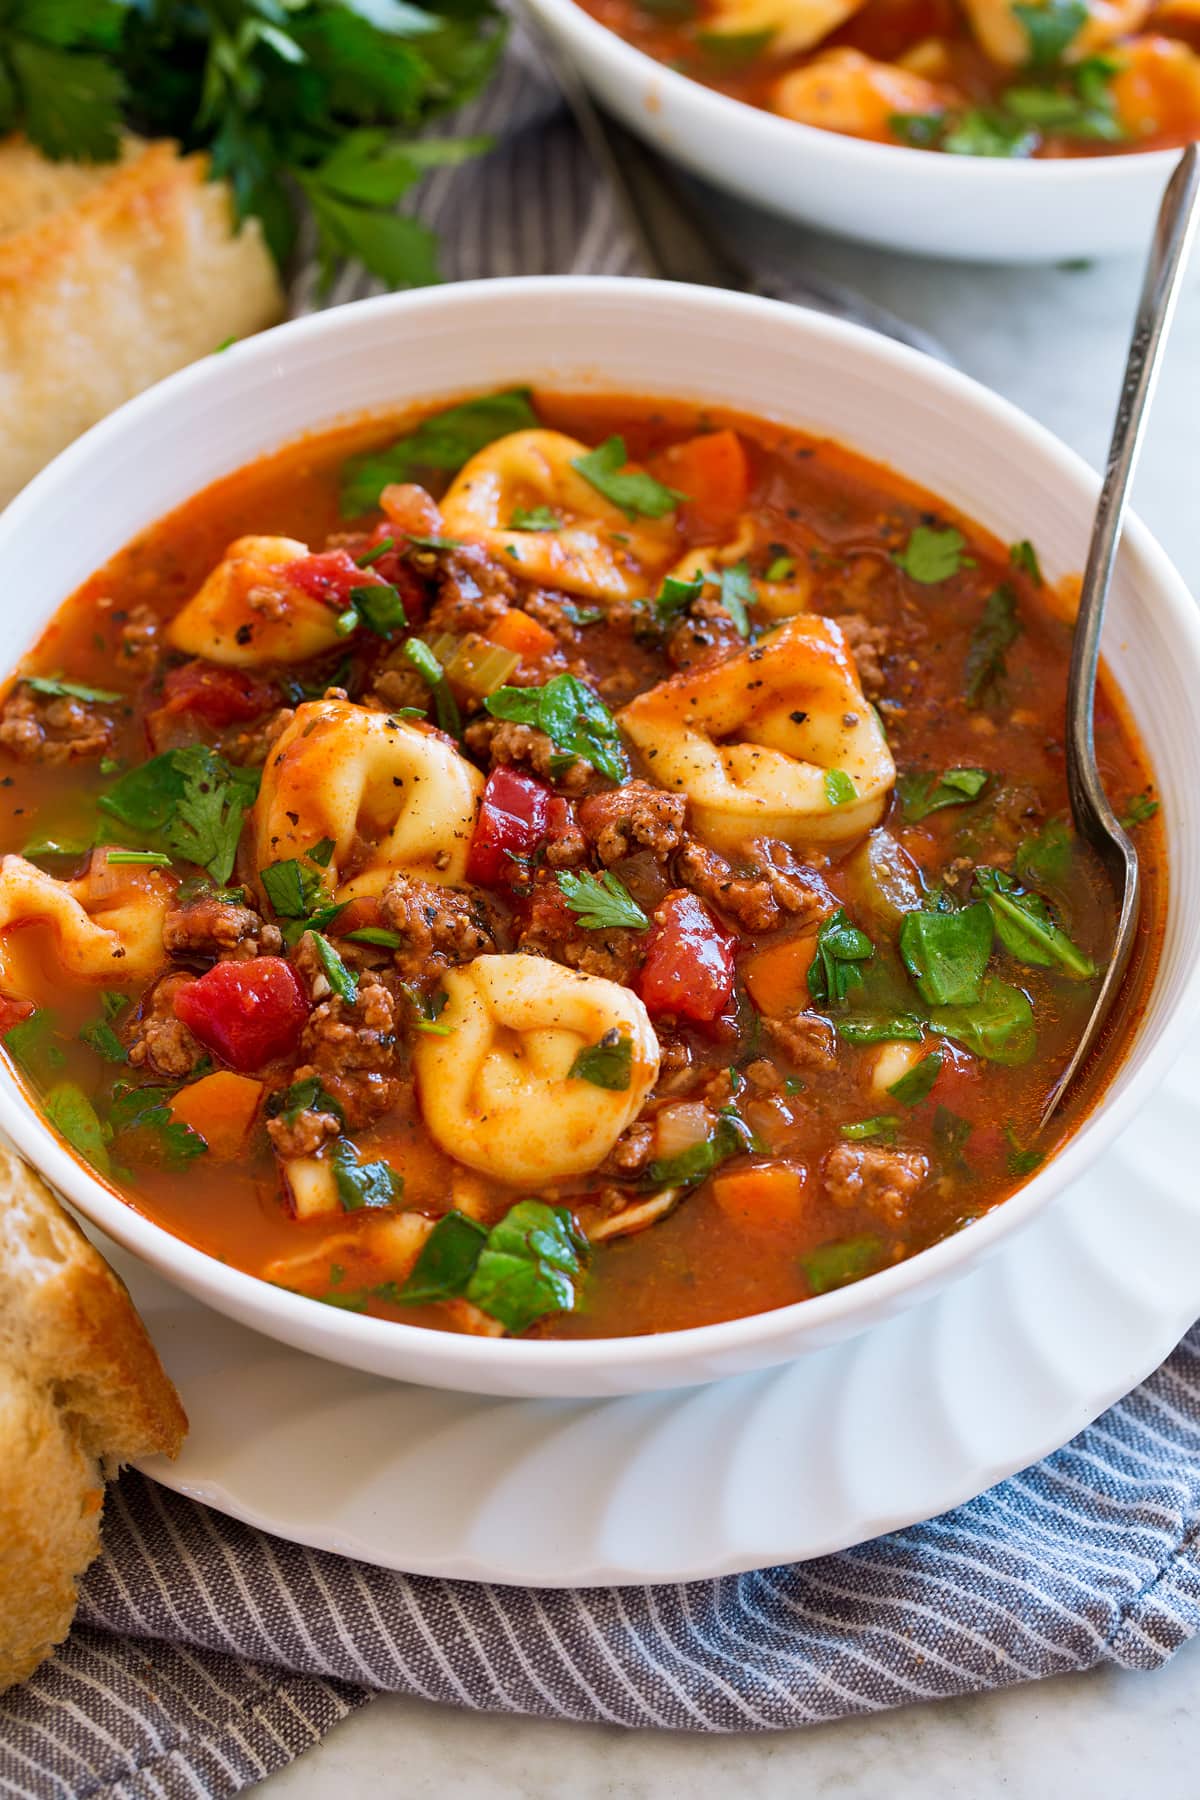 Bowl of tortellini soup with beef, vegetables, tomatoes and three cheese tortellini.